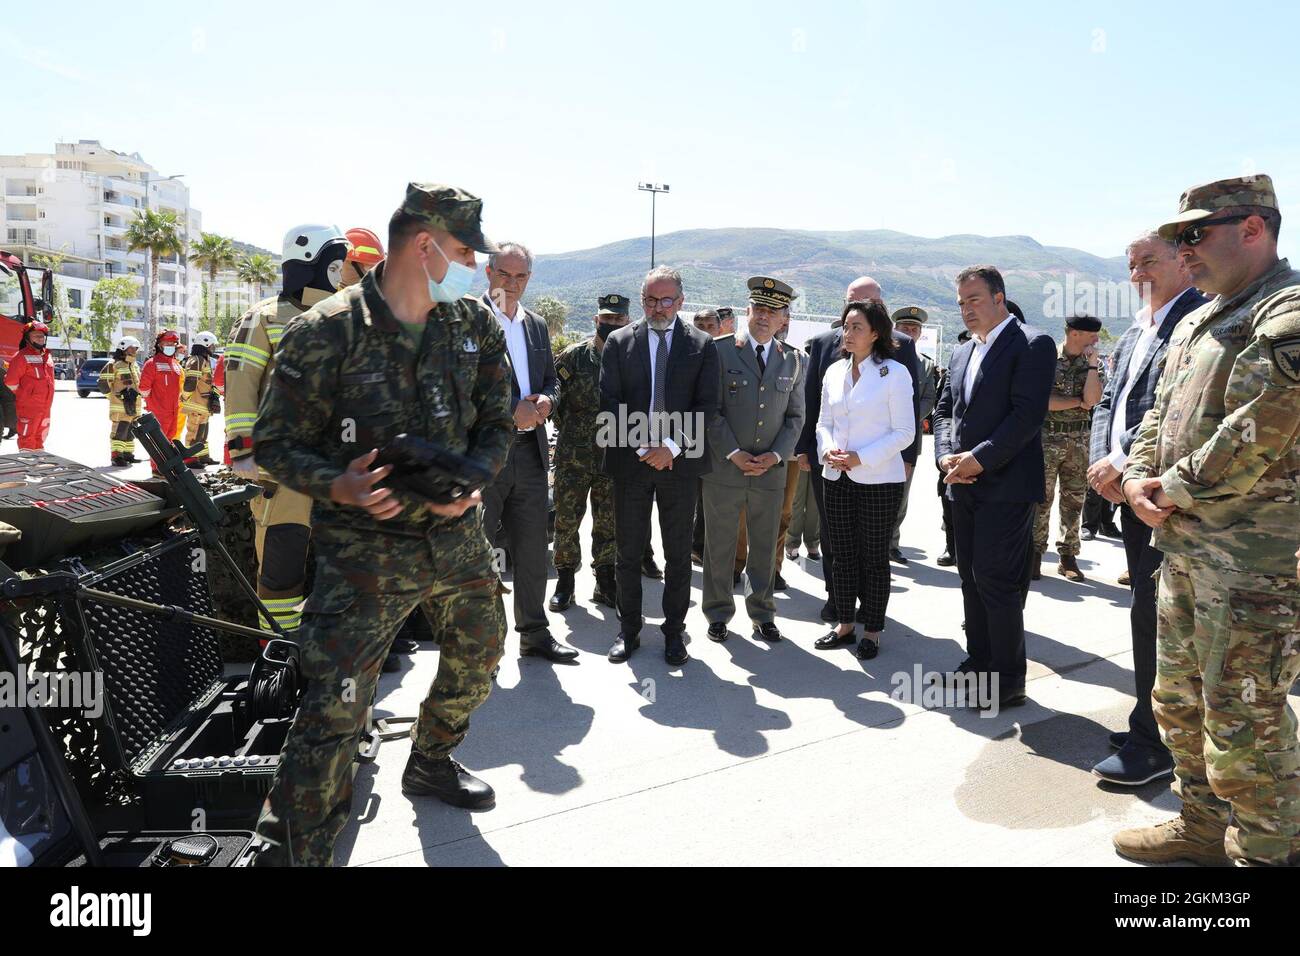 The Albanian Armed Forces Explosive Ordnance Disposal (EOD) unit shows off U.S.-donated equipment May 22, 2021, at a military sponsored open house in Vlore, Albania, held as part of DEFENDER-Europe 21 activities.  During the event, U.S. Ambassador to Albania Yuri Kim was briefed on the equipment and the continued U.S. commitment to peace and security in Albania, which includes decontamination of landmine and unexploded ordnance sites left over from previous conflict here. DEFENDER-Europe 21 is a large-scale U.S. Army-led exercise designed to build readiness and interoperability between the U.S Stock Photo